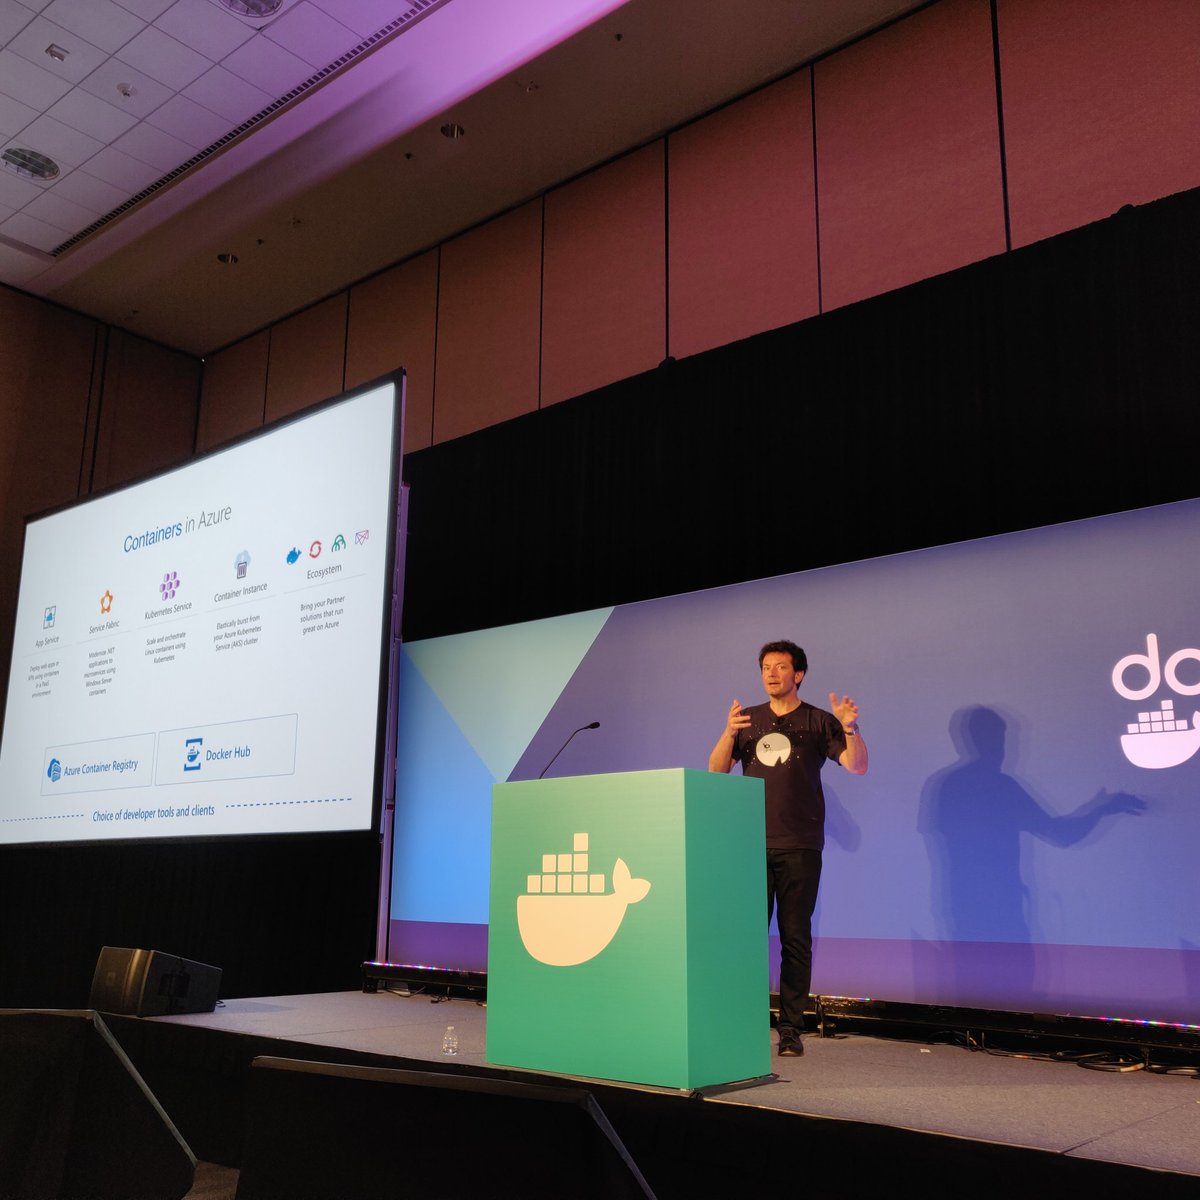 @chanezon running through various methods for #CloudNative development including @kubernetes, @HelmPack @cnab_spec @azure #aks, #azds , @openfaas @telepresenceio  etc But the maximum applause was reserved for when @code #LiveShare was used to mentor his student Luka. #DockerCon